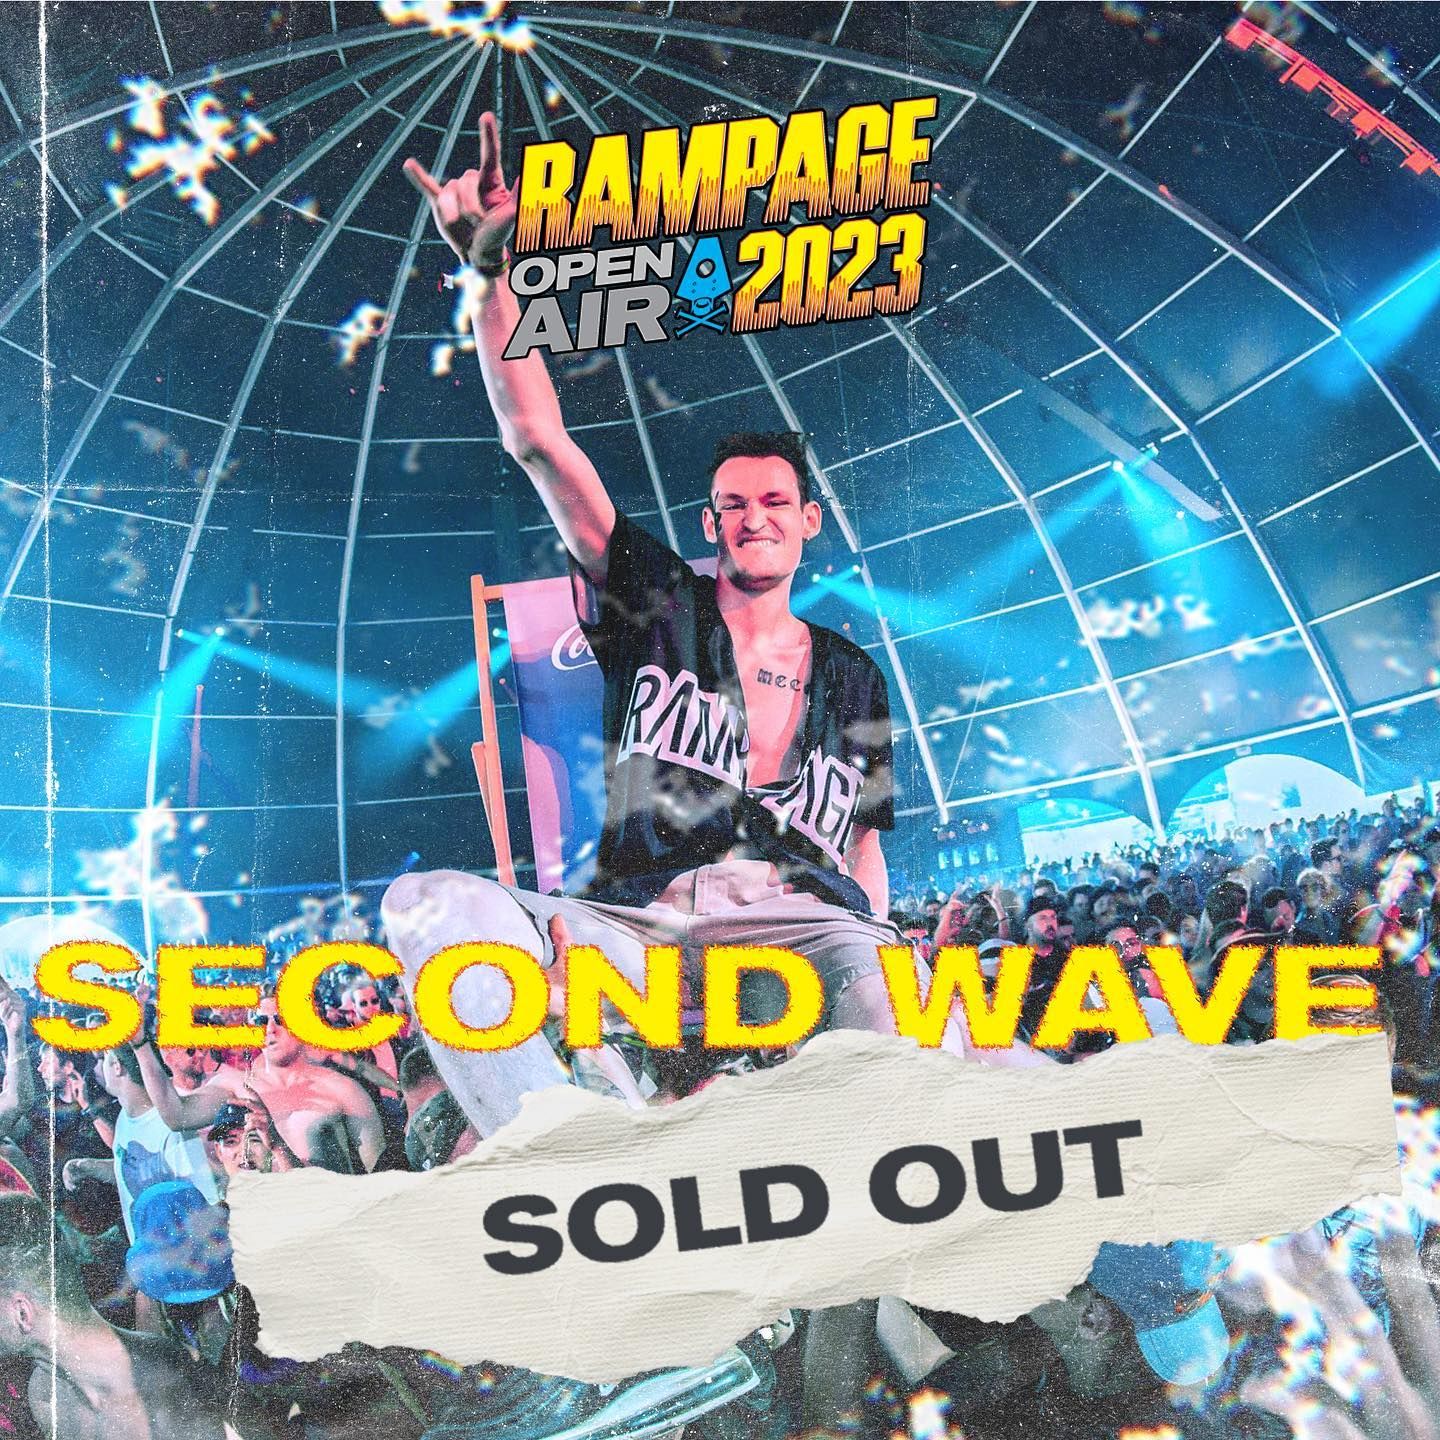 Second Wave Sold Out - Rampage Open Air